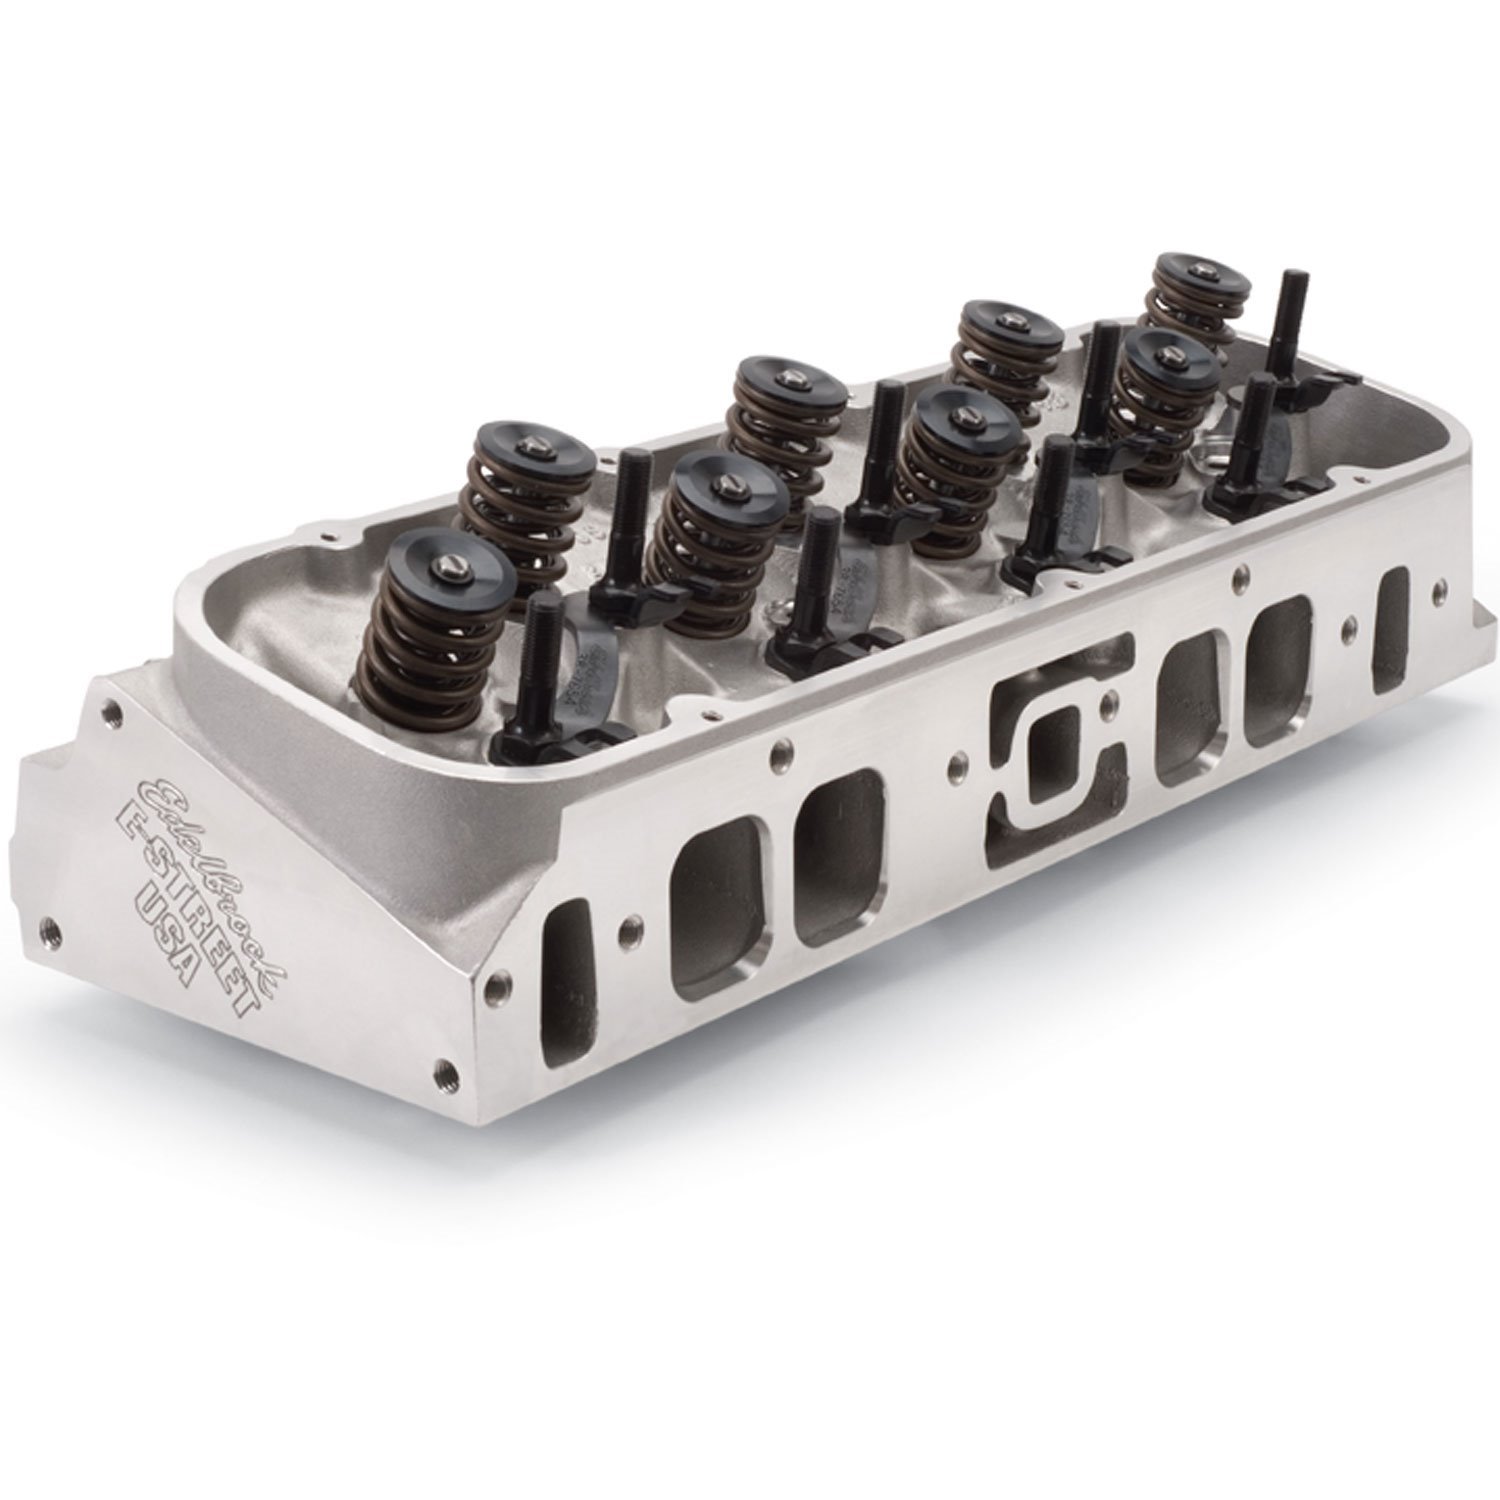 50459 E-Street Cylinder Heads for Big Block Chevy